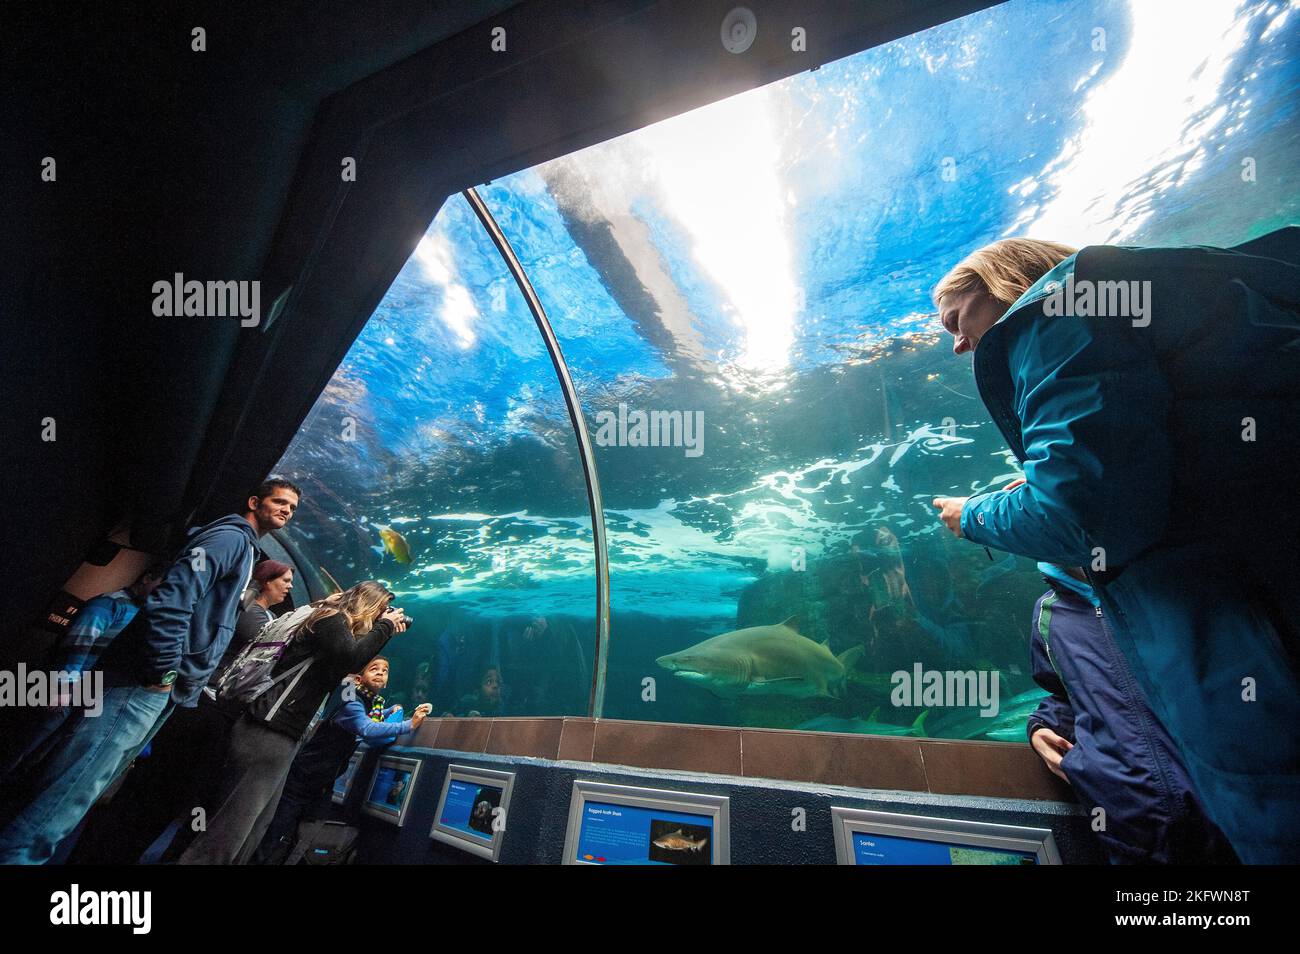 Tourists visiting the iconic Two Oceans Aquarium, a popular destination in Capetown, South Africa Stock Photo